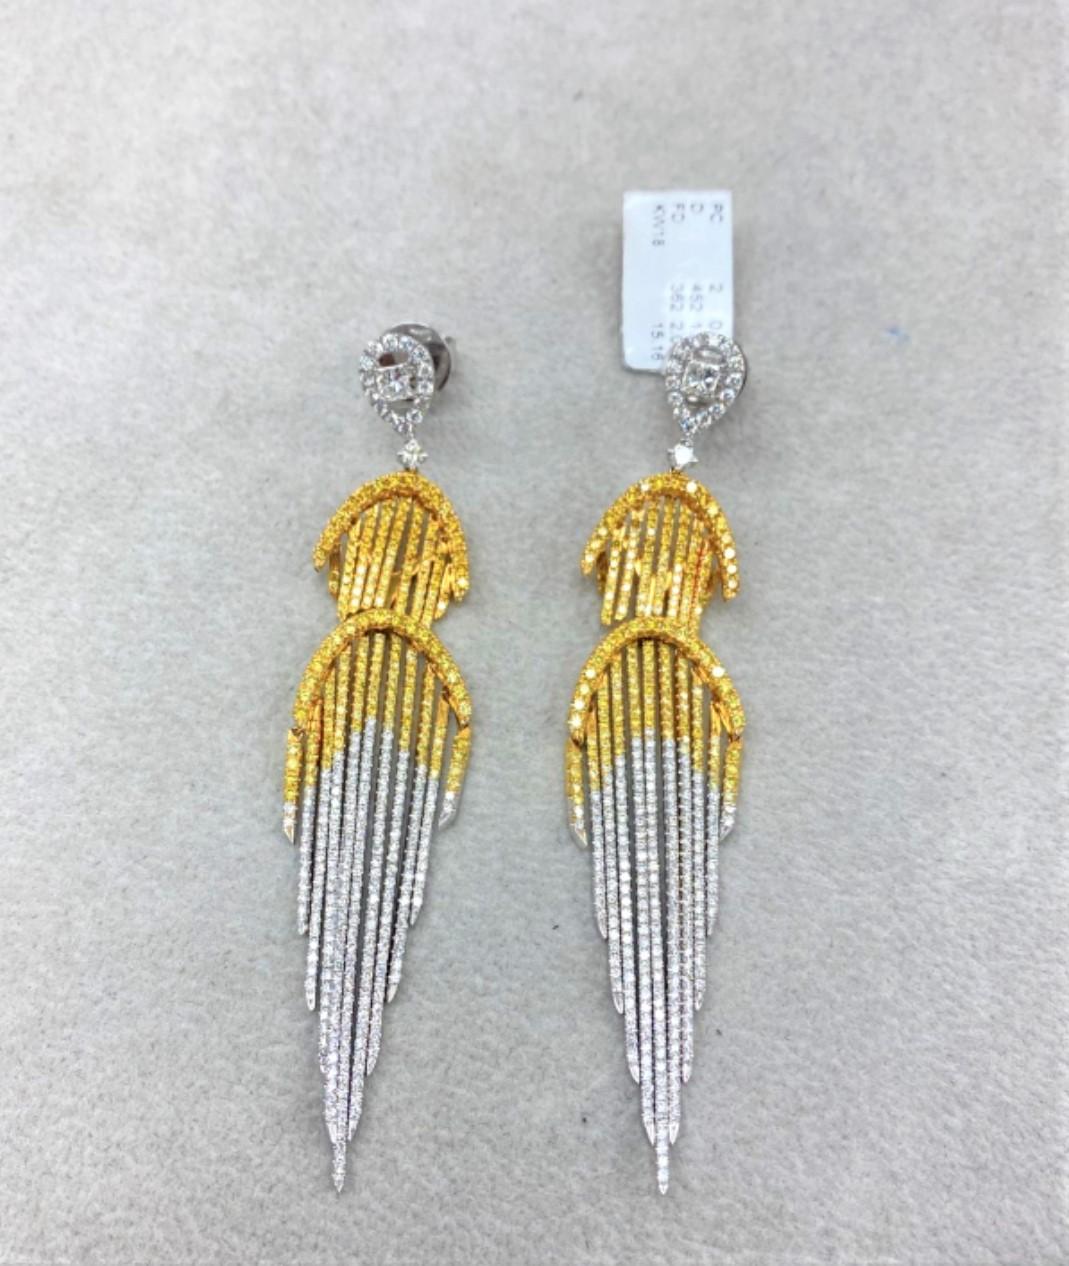 The Following Items we are offering is a Rare Important Radiant 18KT Gold Glamorous and Elaborate Rare Magnificent Glittering Diamond Fringe Design Earrings. Earrings feature Rare Sparkling Fine Glittering Fancy Yellow and White Diamonds set in 18KT